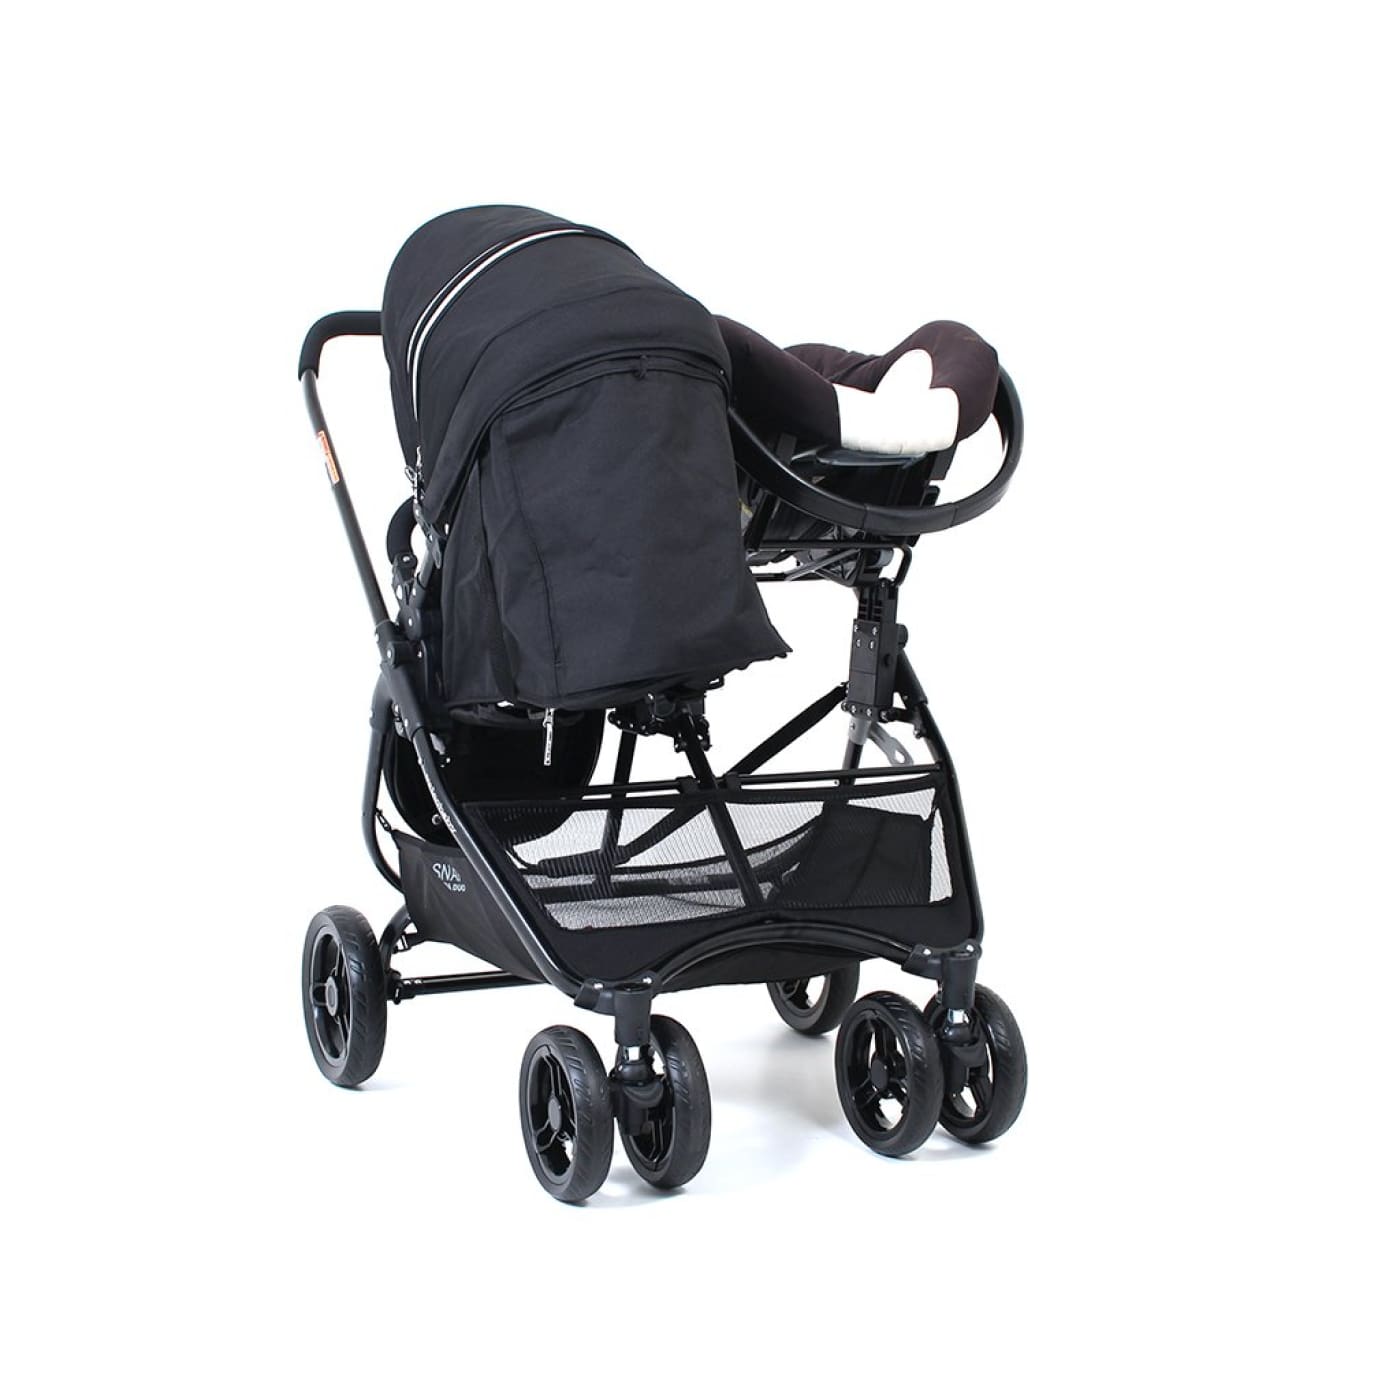 Valco Baby Adaptor B Secondary for Snap Ultra Duo (Britax/Maxi Cosi/Gemm) - PRAMS & STROLLERS - ADAPTORS FOR TRAV SYS